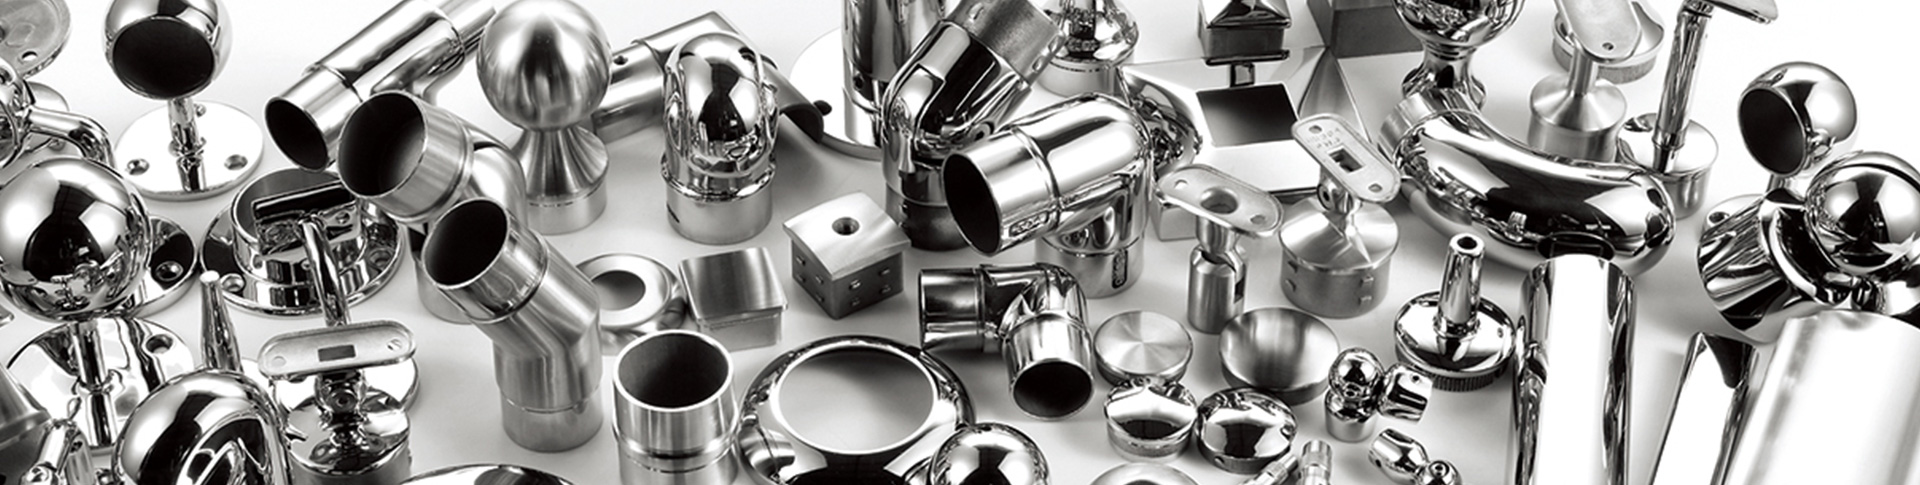 Many different kinds of stainless steel fittings.